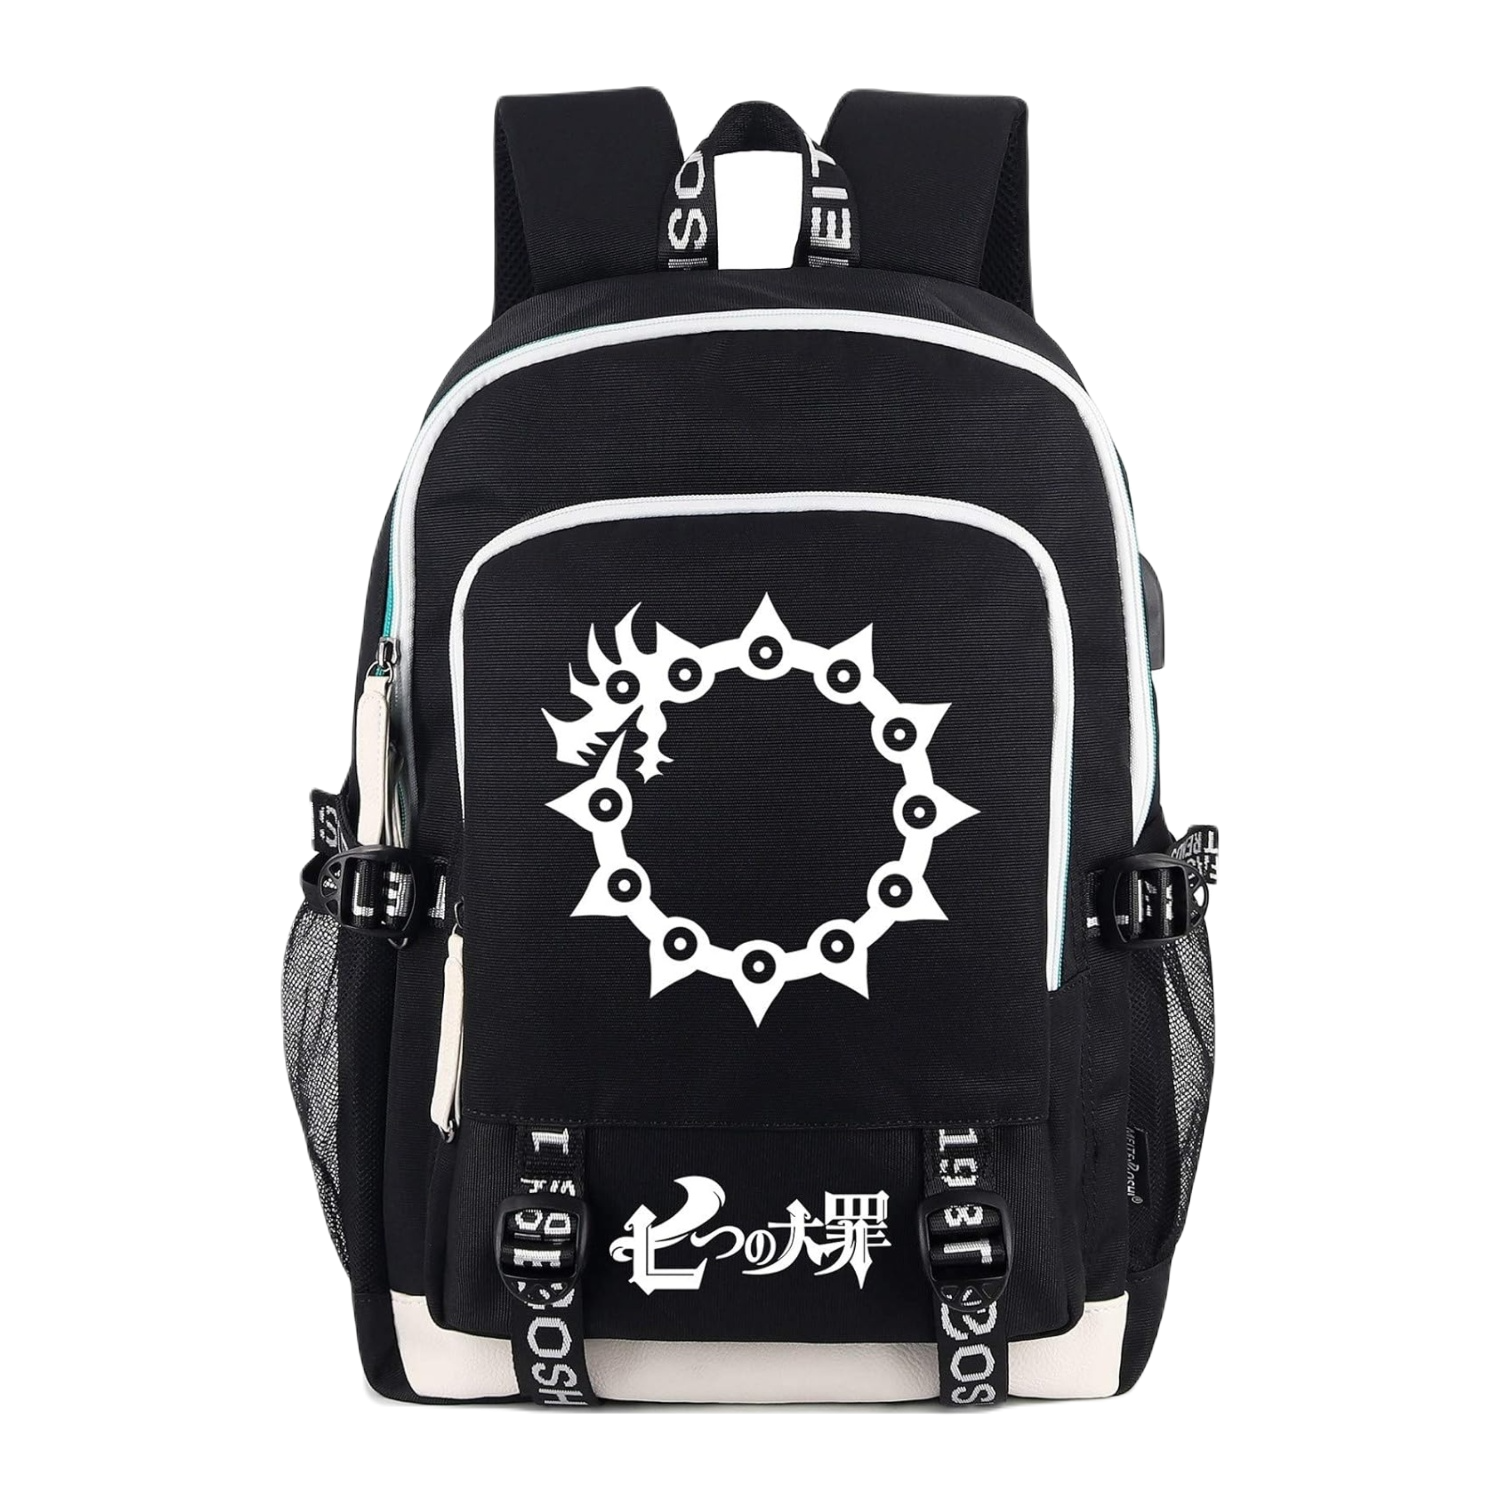 The Seven Deadly Sins Luminous Backpack